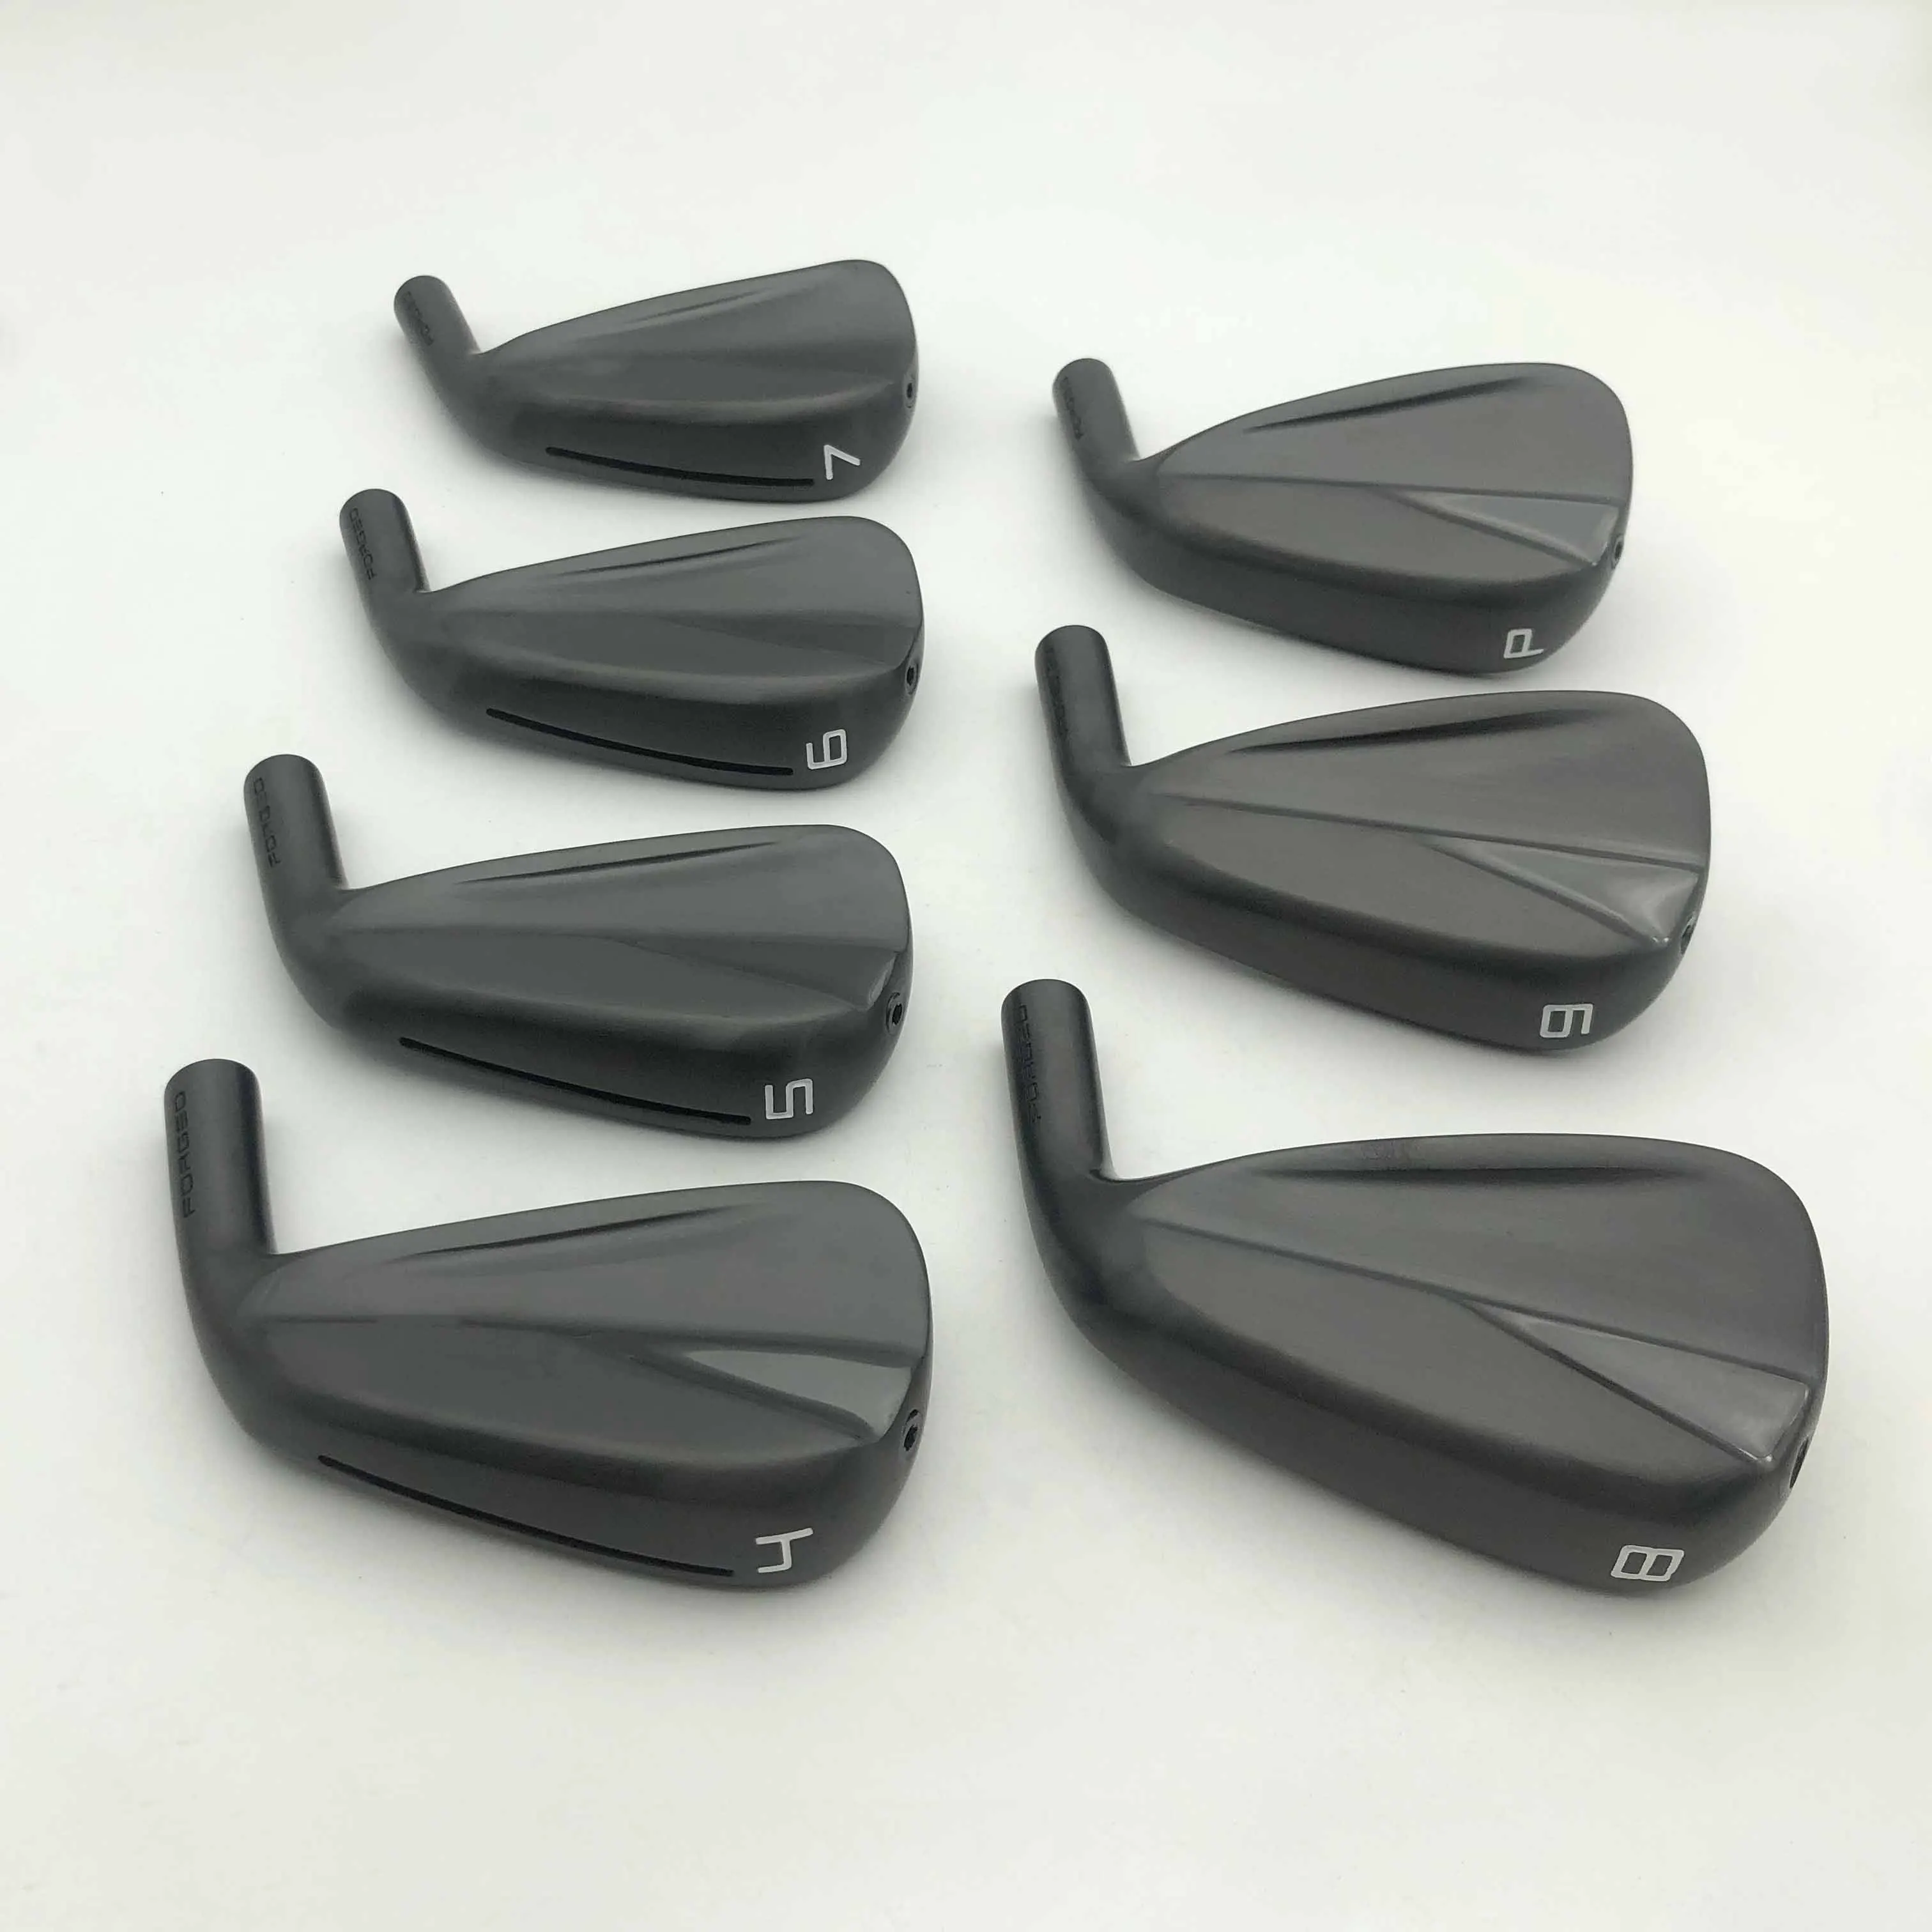 TL made Black P770 Golf Clubs P770 Iron Set Three Generations Of Tour Long Distance Forged Hollow Blade Back 456789P Free Ship